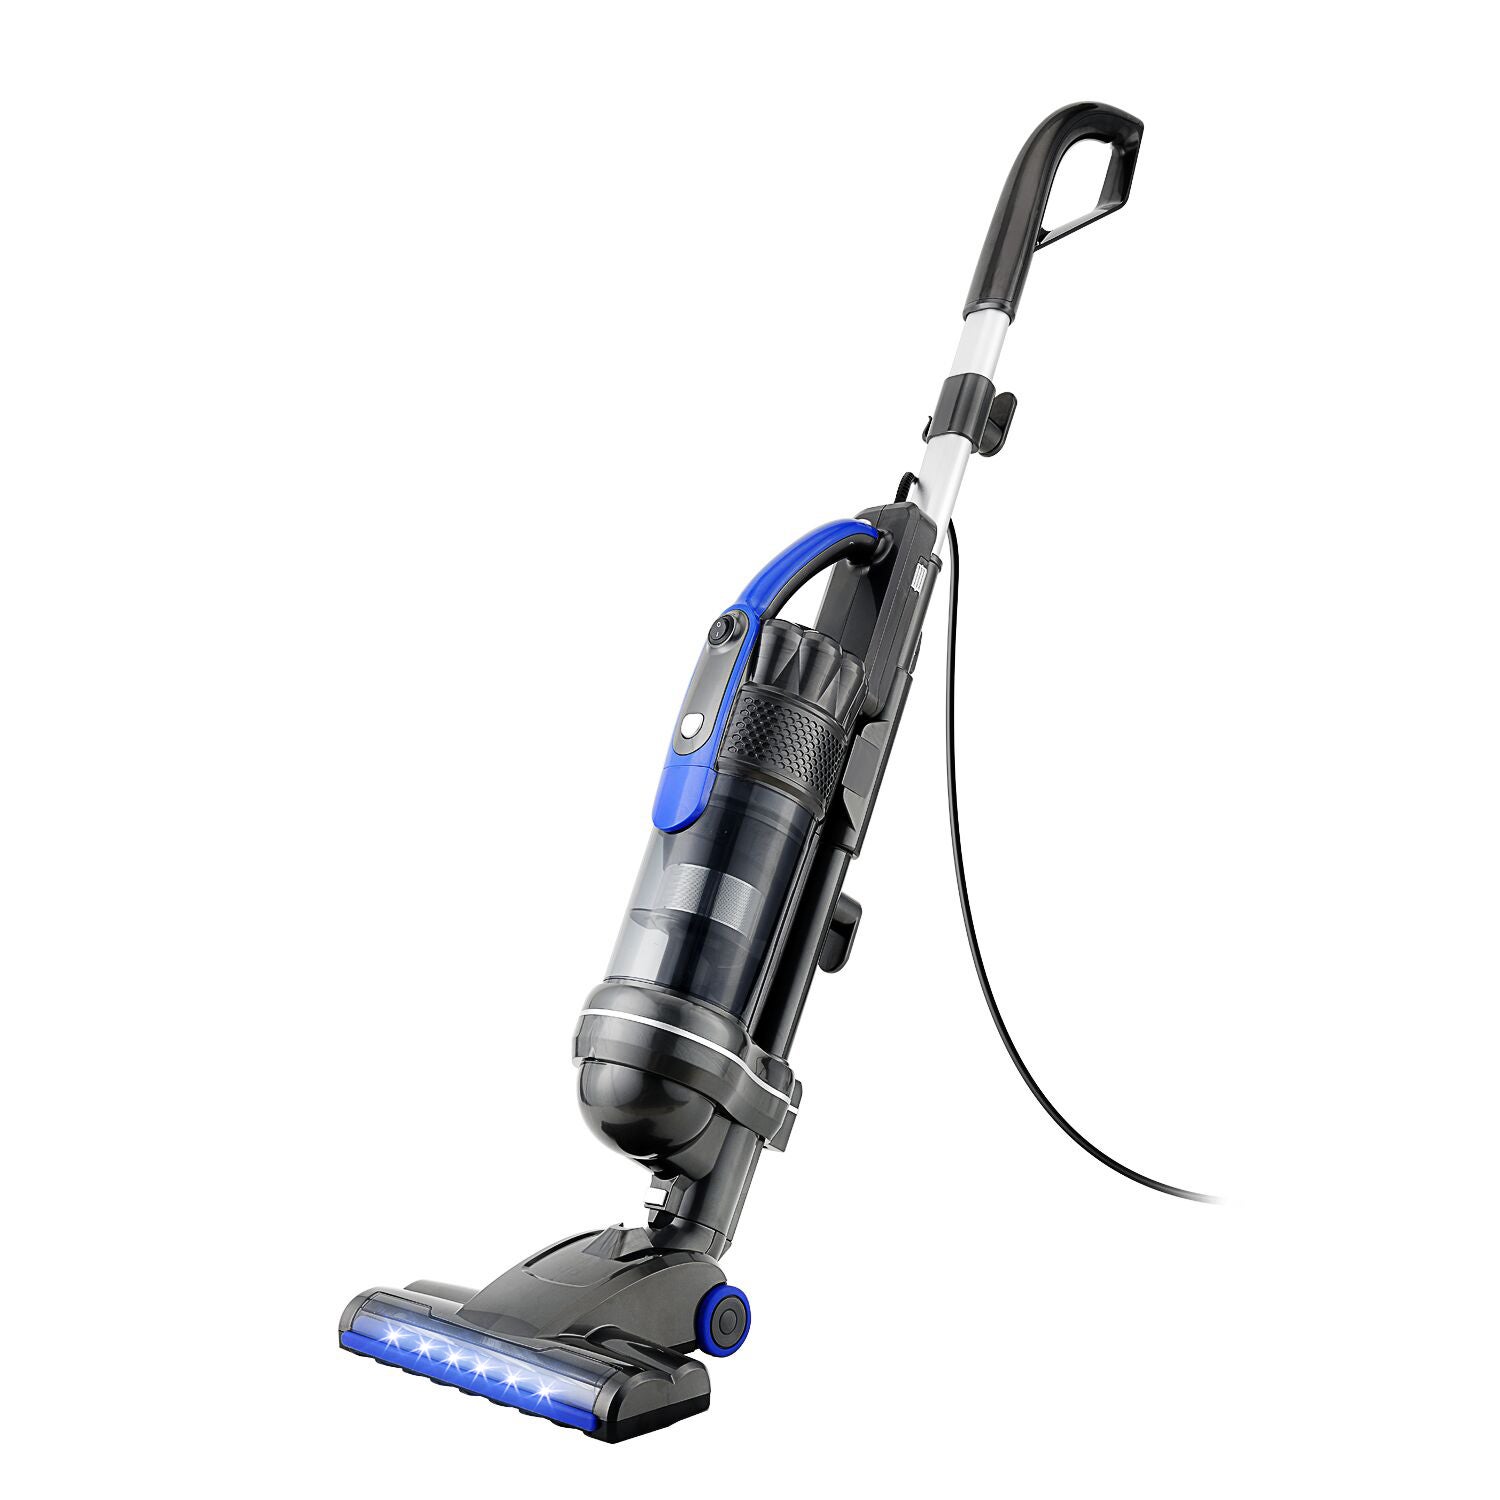 Akitas 1200w 2 in 1 Corded Upright Vacuum Cleaner Hoover With Turbo Spinning Brush Head Light Weight Carpet floor Car